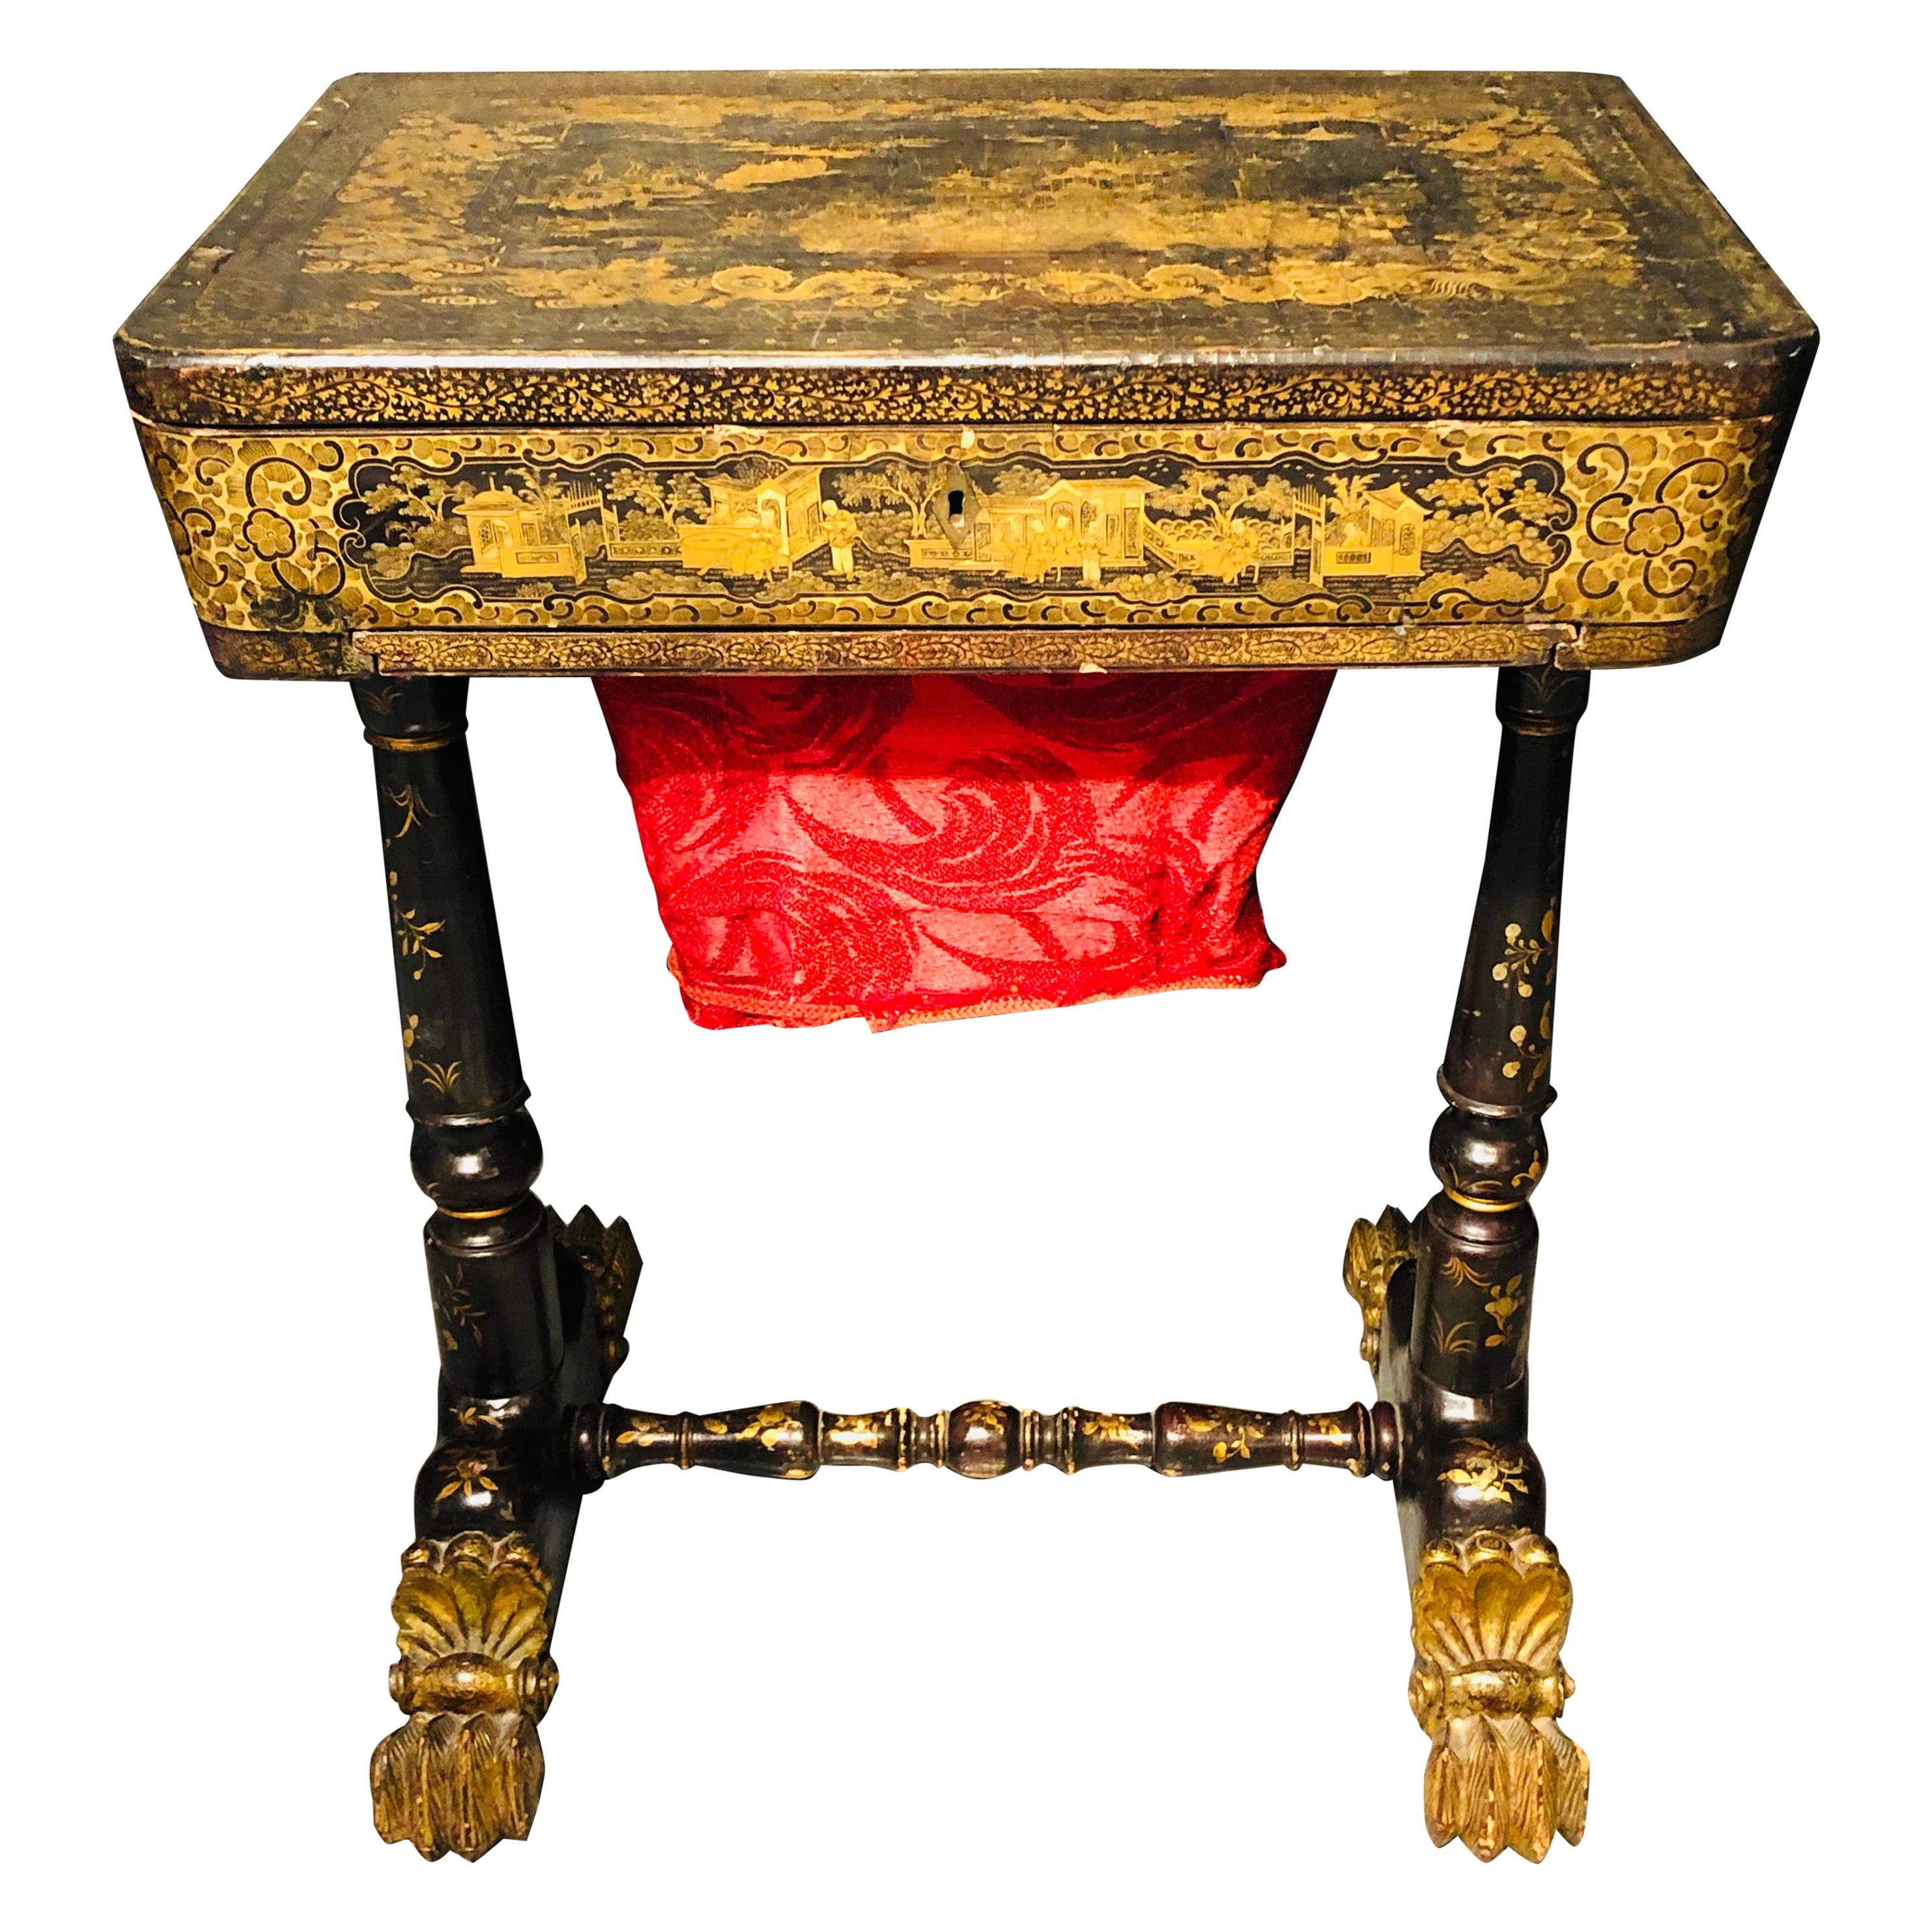 19th Century Regency Chinoiserie Decorated Sewing Stand with Elaborate Detail